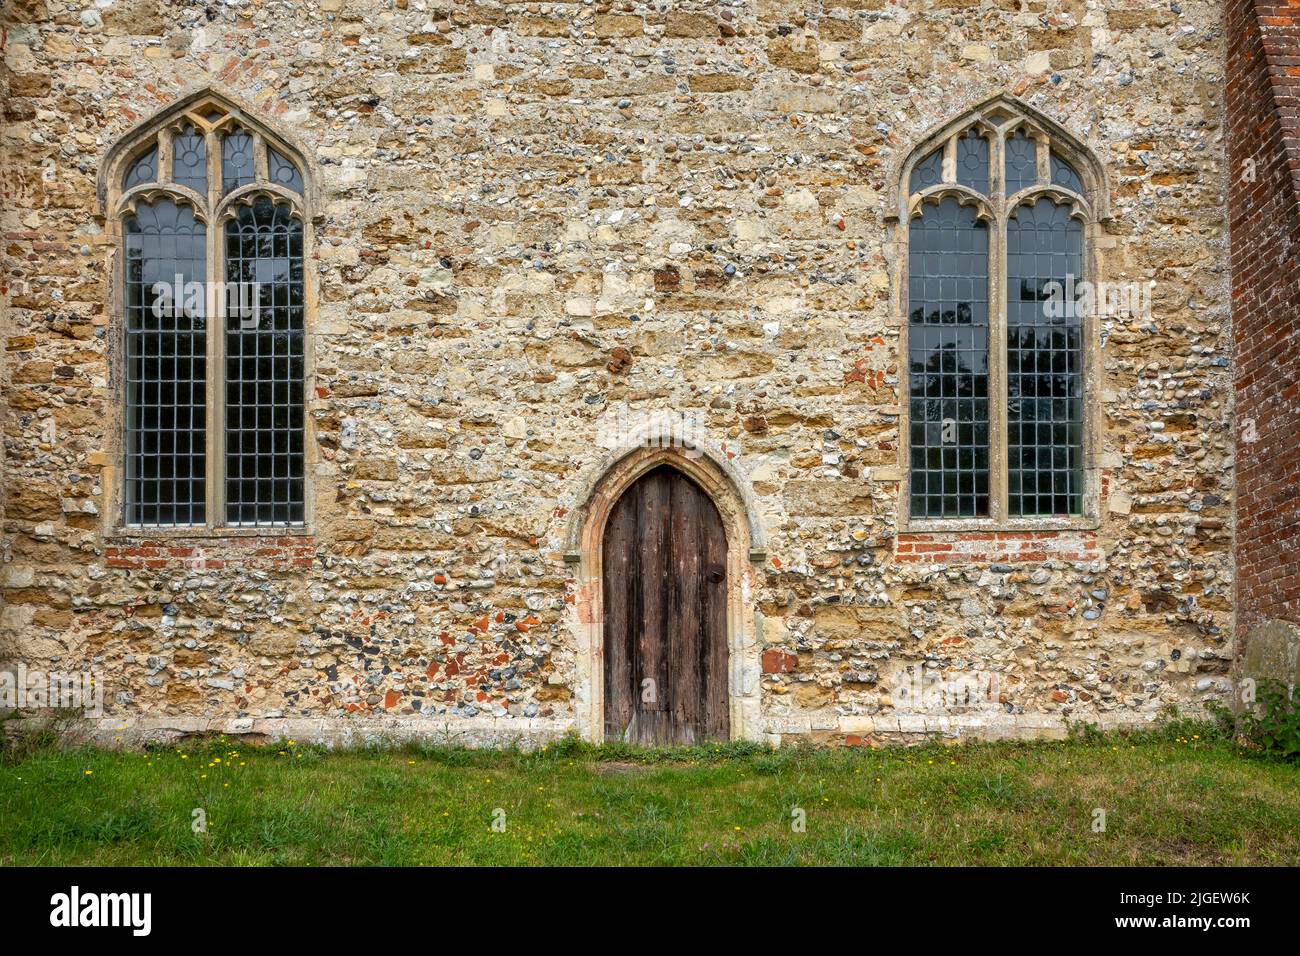 Details of St Michael's Church Tunstall Suffolk showing small door and plain glazed windows Stock Photo